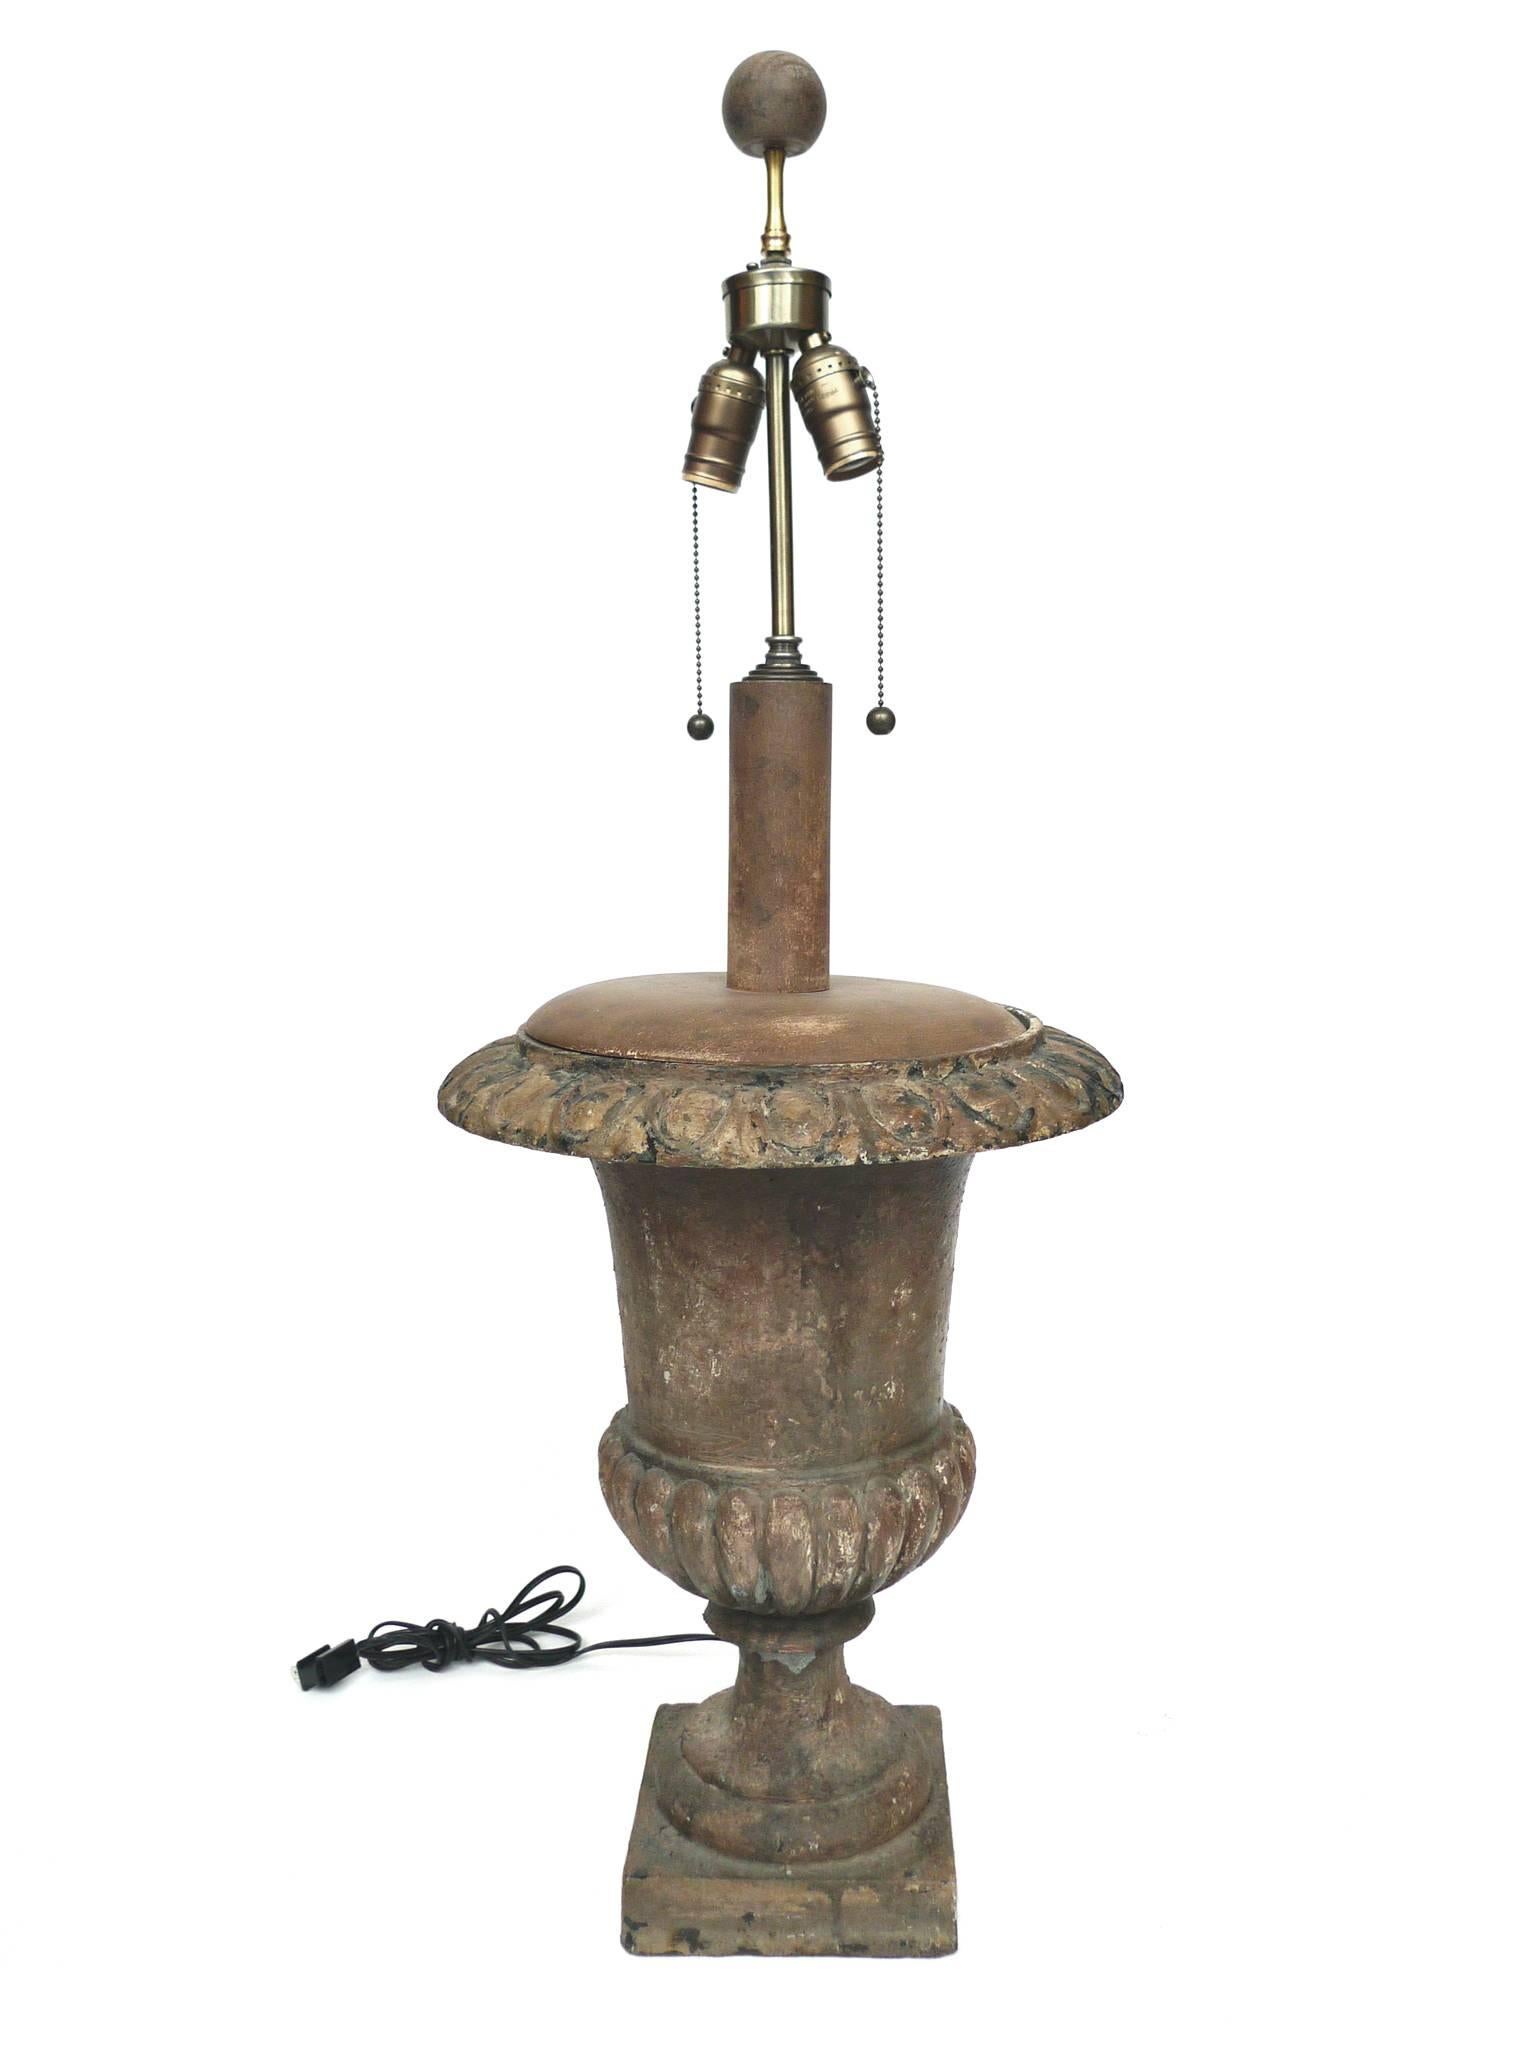 These lamps are crafted from cast iron garden urns dating back to the early 20th century. Their style is reminiscent of neoclassical designs. The patina that has developed further gives a sense of antiquity. The weathered tone and textures are